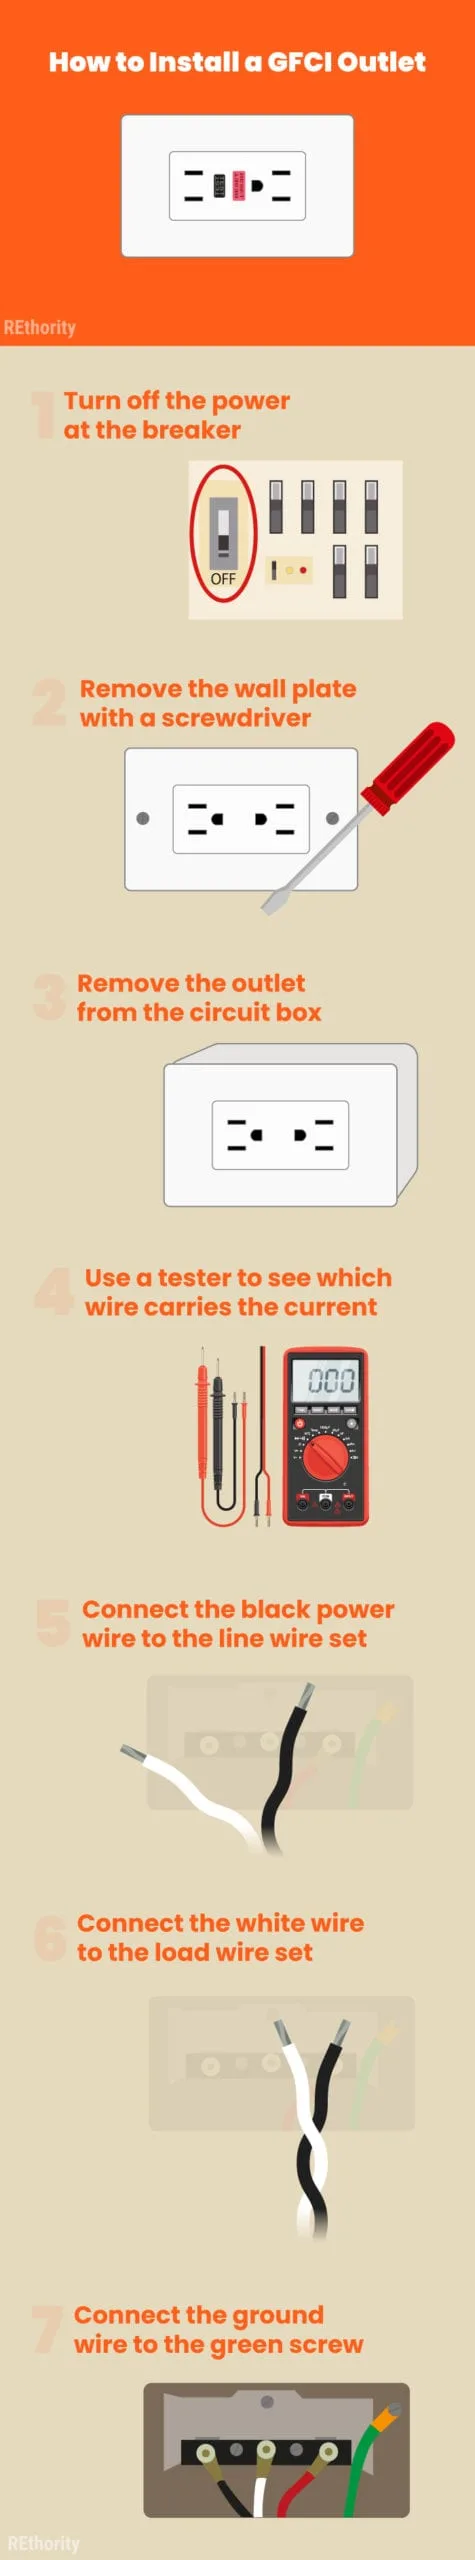 Infographic showing how to install a gfci outlet